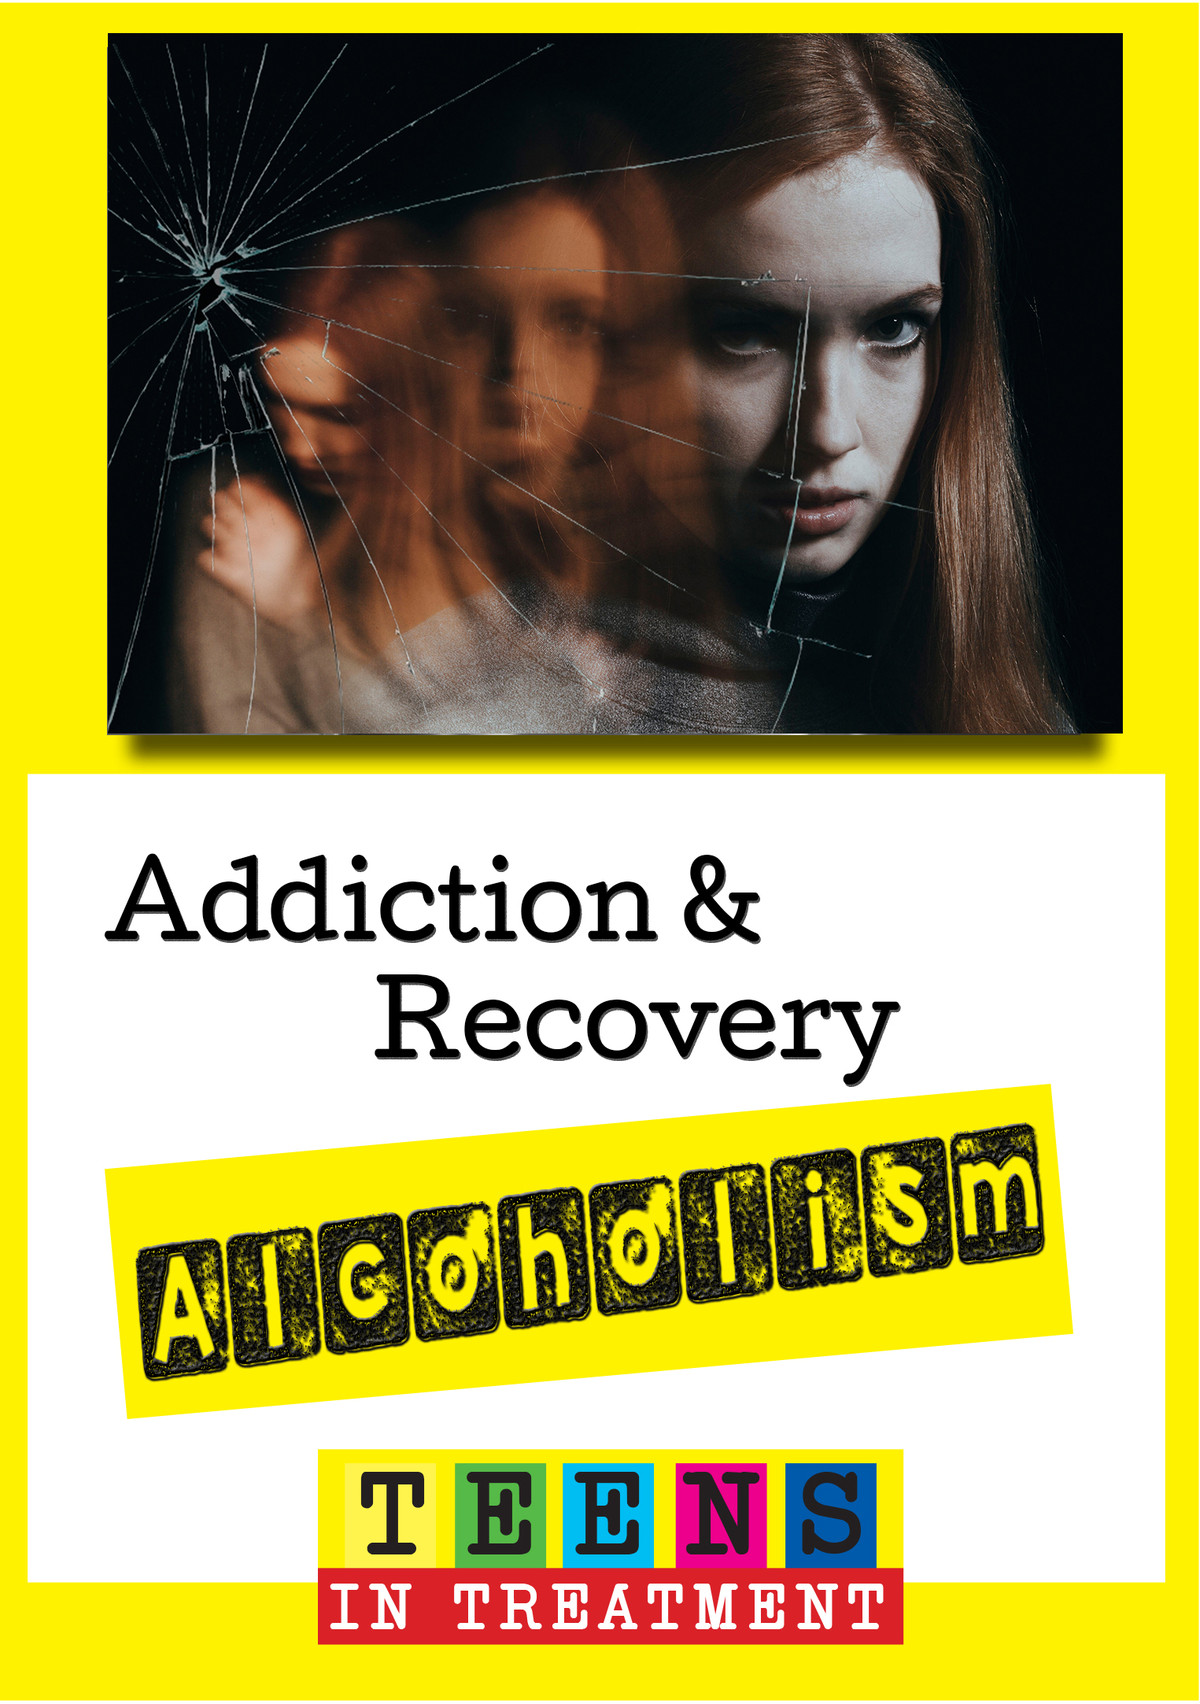 Q517 - Alcohol Addiction & Recovery